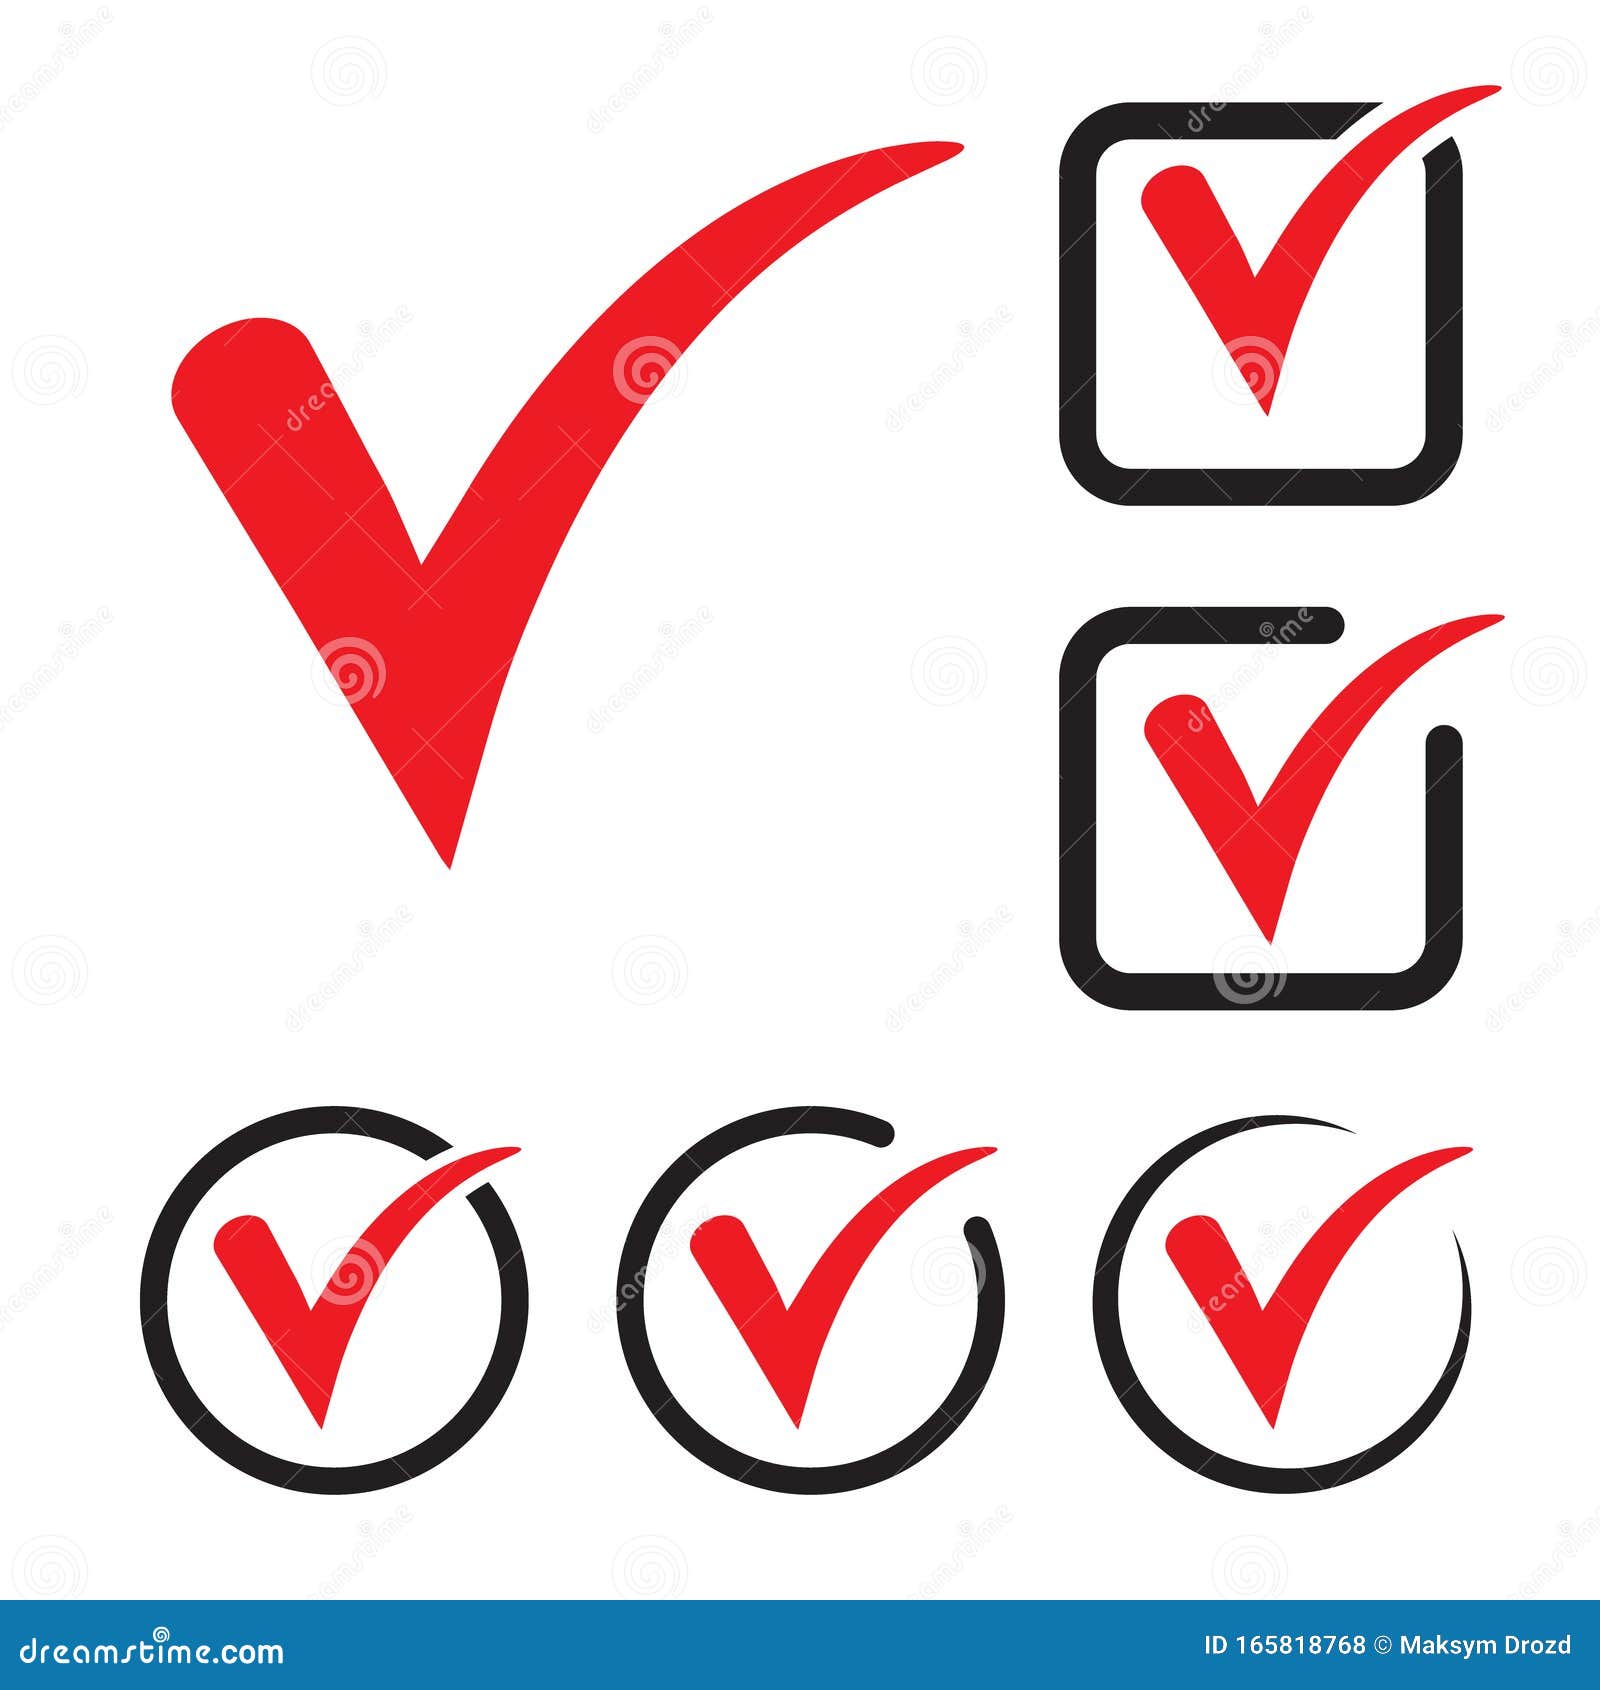 red tick icon  , checkmark  on white background, checked icon or correct choice sign, check mark or checkbox p